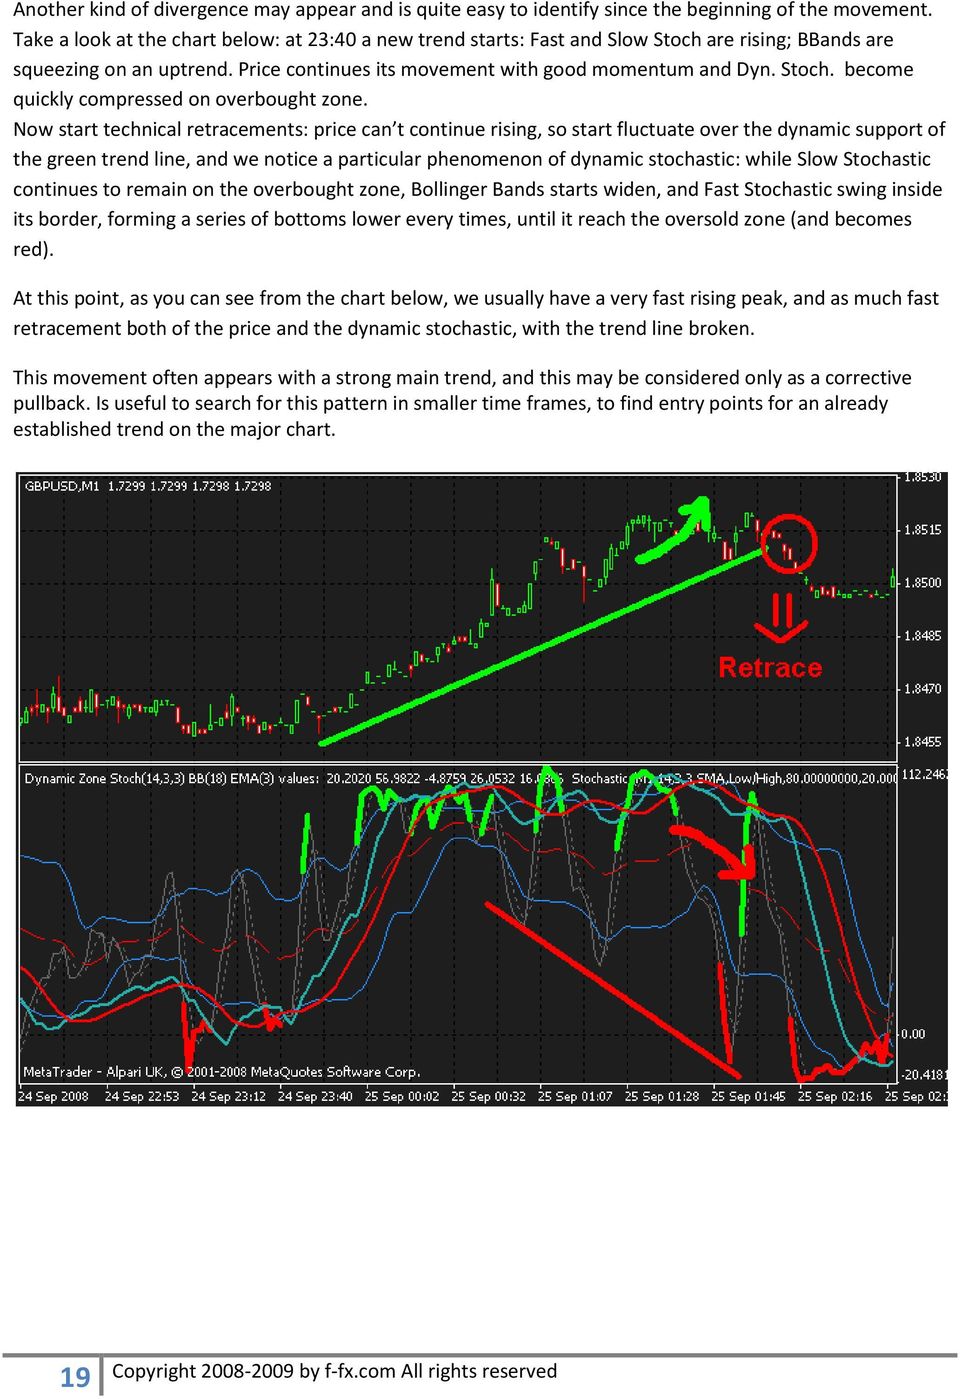 Now start technical retracements: price can t continue rising, so start fluctuate over the dynamic support of the green trend line, and we notice a particular phenomenon of dynamic stochastic: while